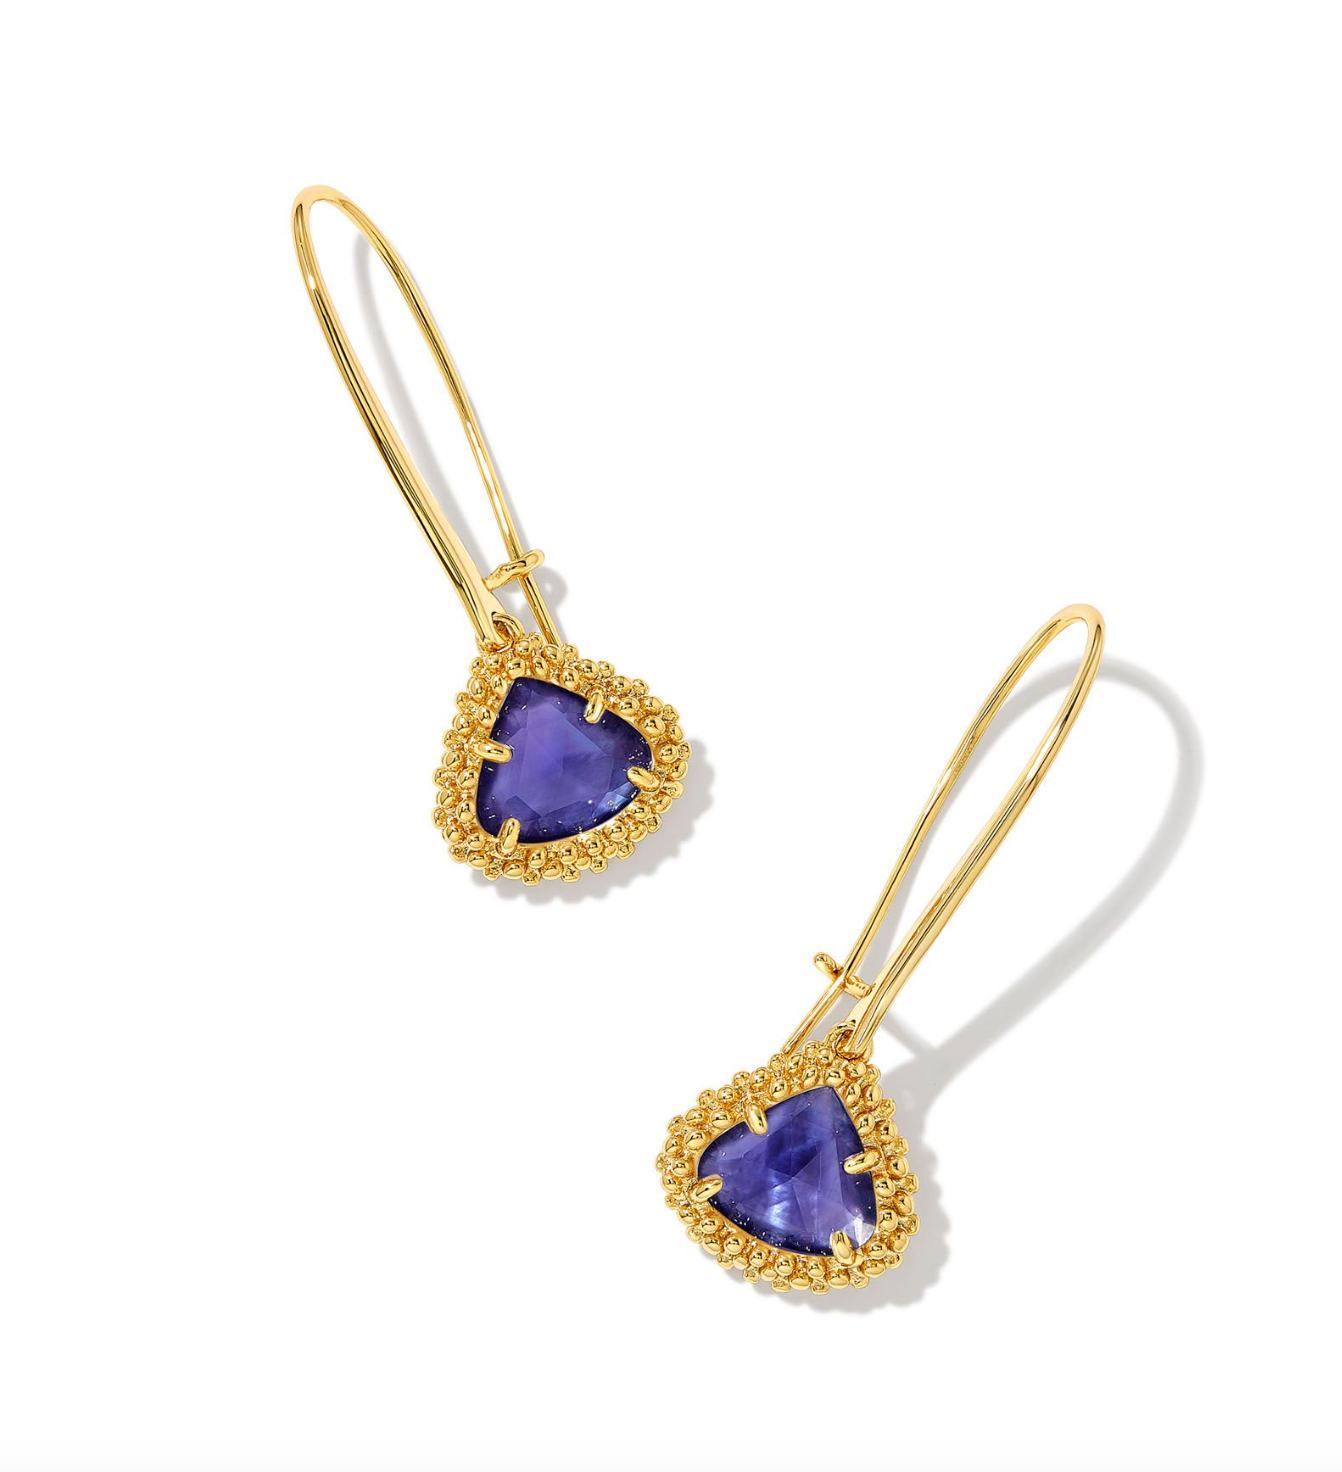 Framed Kendall Gold Wire Drop Earrings in Dark Lavender Illusion | KENDRA SCOTT - The Street Boutique 